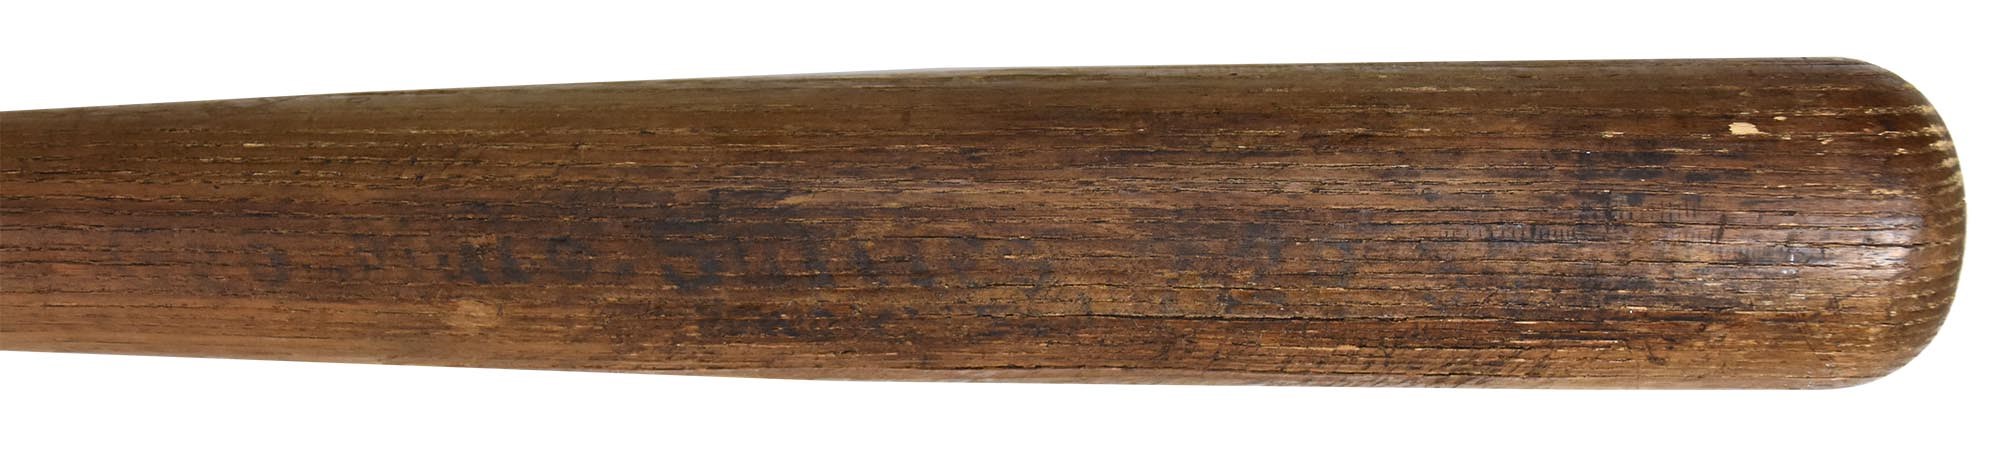 Negro League, Latin, Japanese & International Base - 1937 George “Mule” Suttles Game Used Bat - Only Known Bat of this Negro Leaguer & HOFer (PSA/DNA)